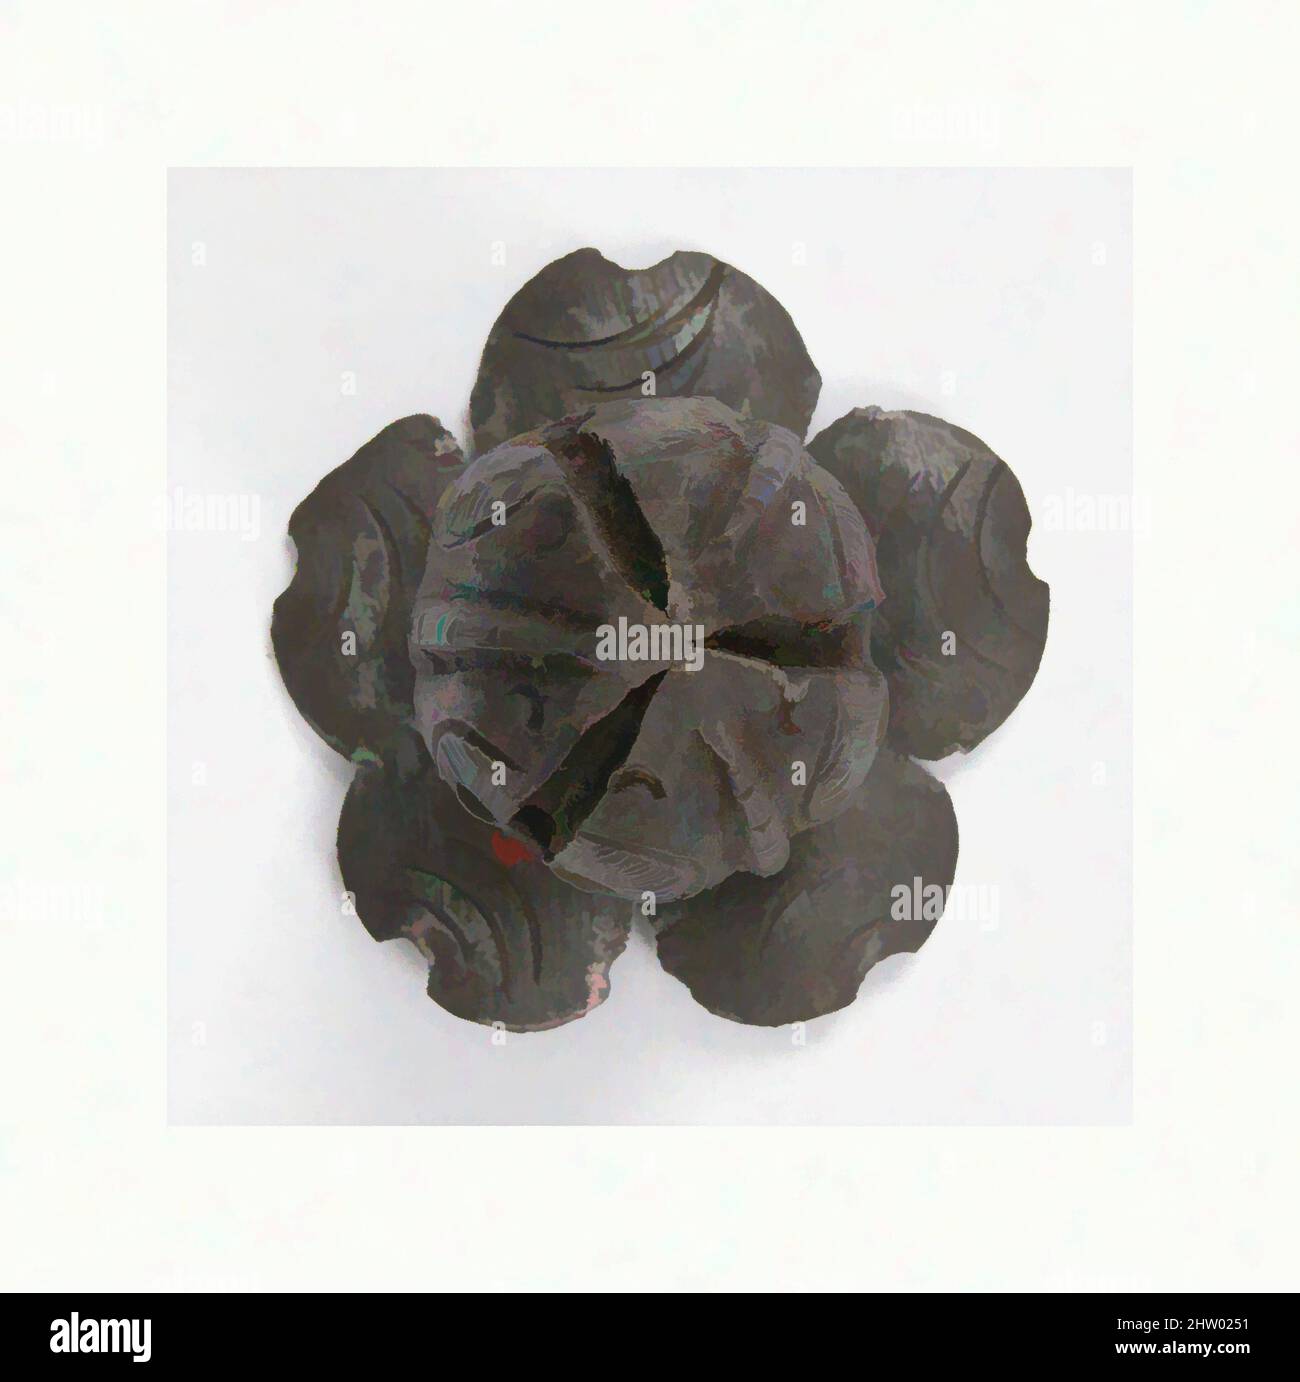 Art inspired by Nail, 16th century, German, Iron, Overall (as if installed): 1 5/16 x 13/16 in. (3.4 x 2.1 cm), Metalwork-Iron, Classic works modernized by Artotop with a splash of modernity. Shapes, color and value, eye-catching visual impact on art. Emotions through freedom of artworks in a contemporary way. A timeless message pursuing a wildly creative new direction. Artists turning to the digital medium and creating the Artotop NFT Stock Photo